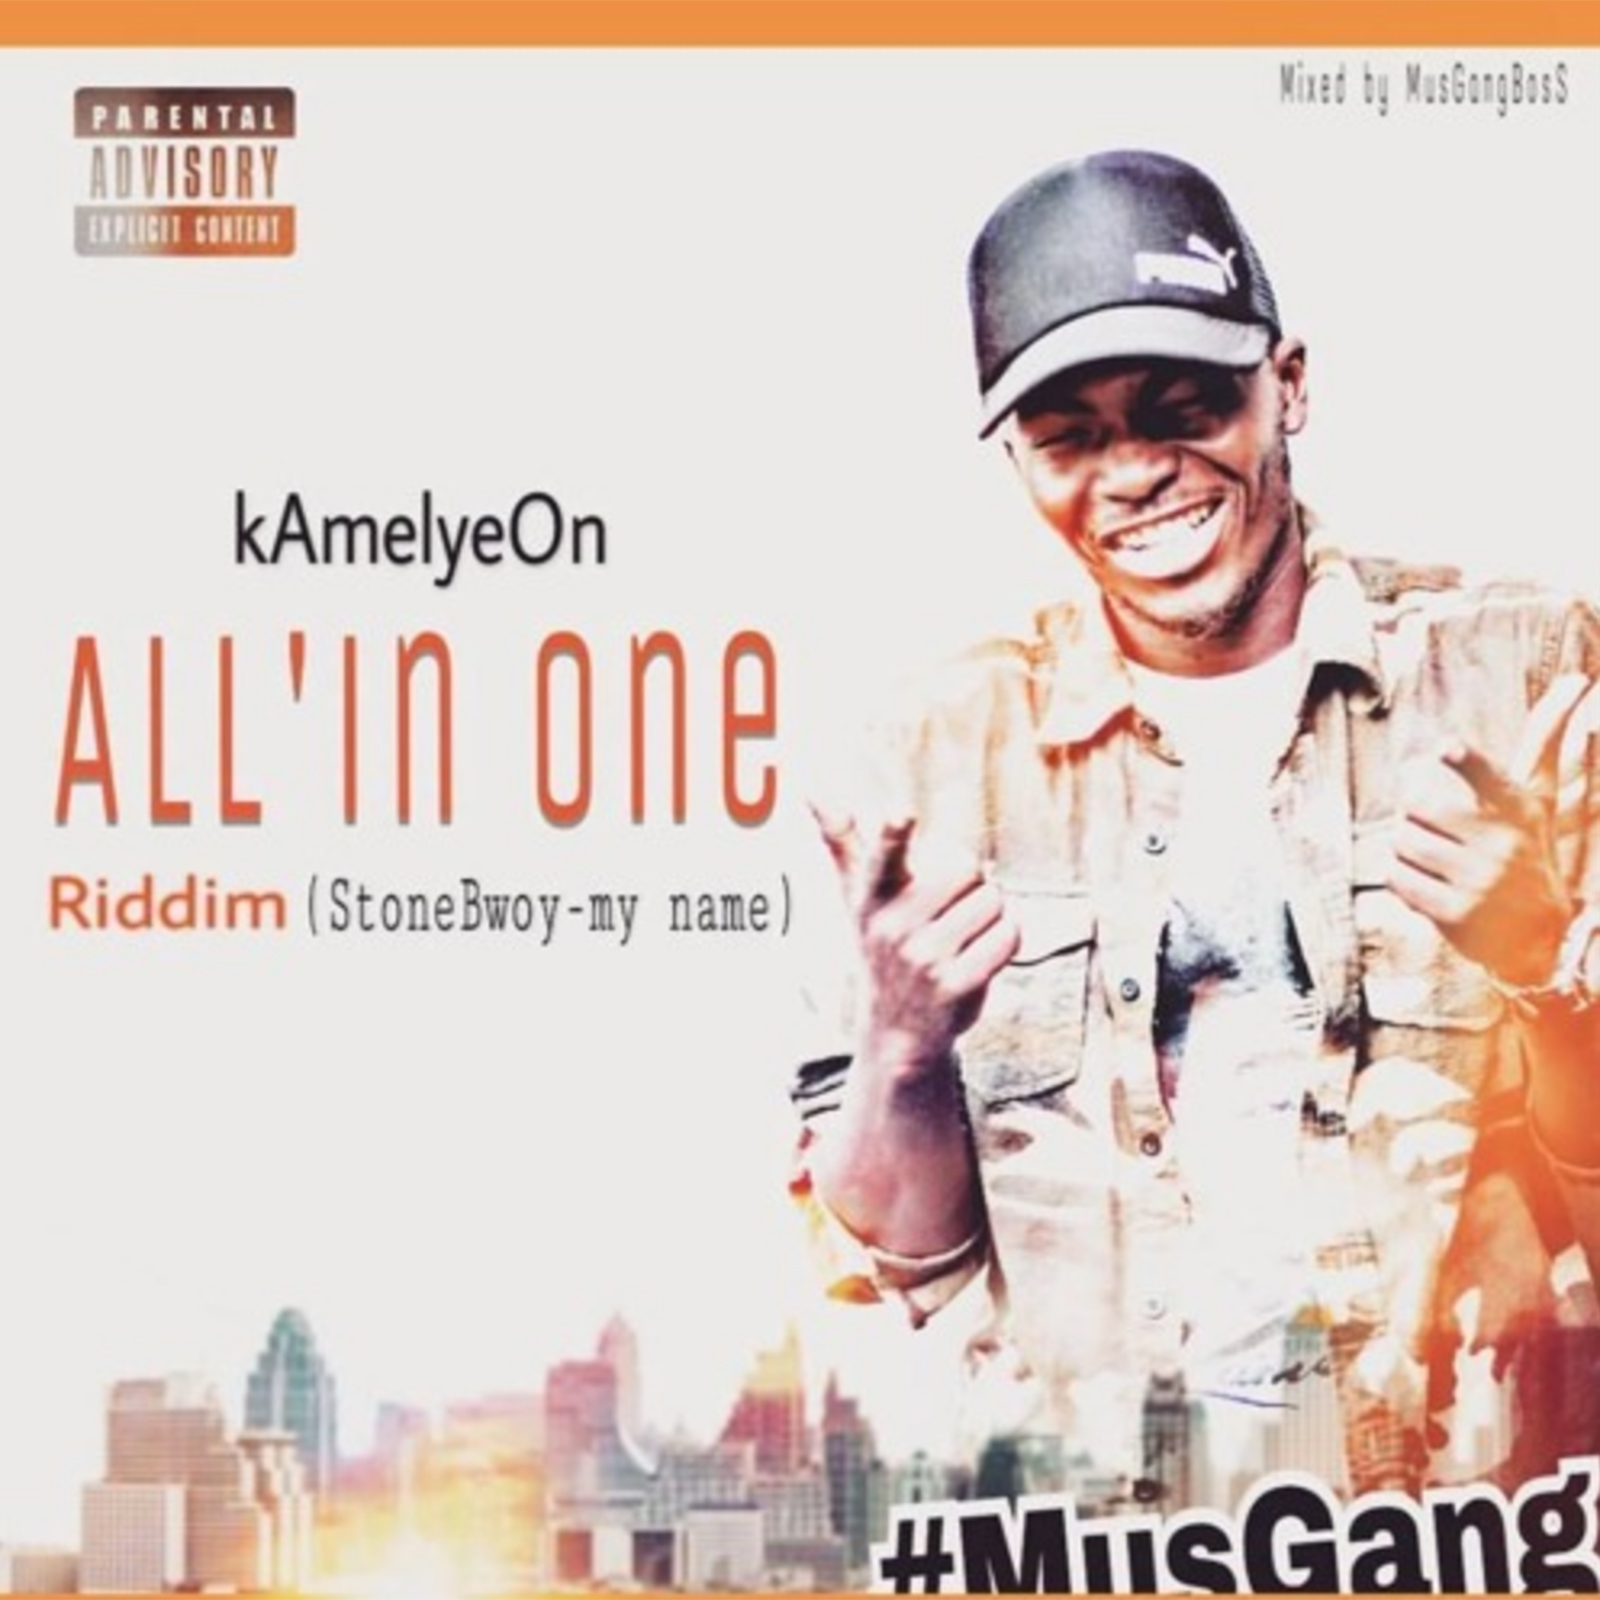 All' In One Riddim (Stonebwoy My Name cover) by Kamelyeon